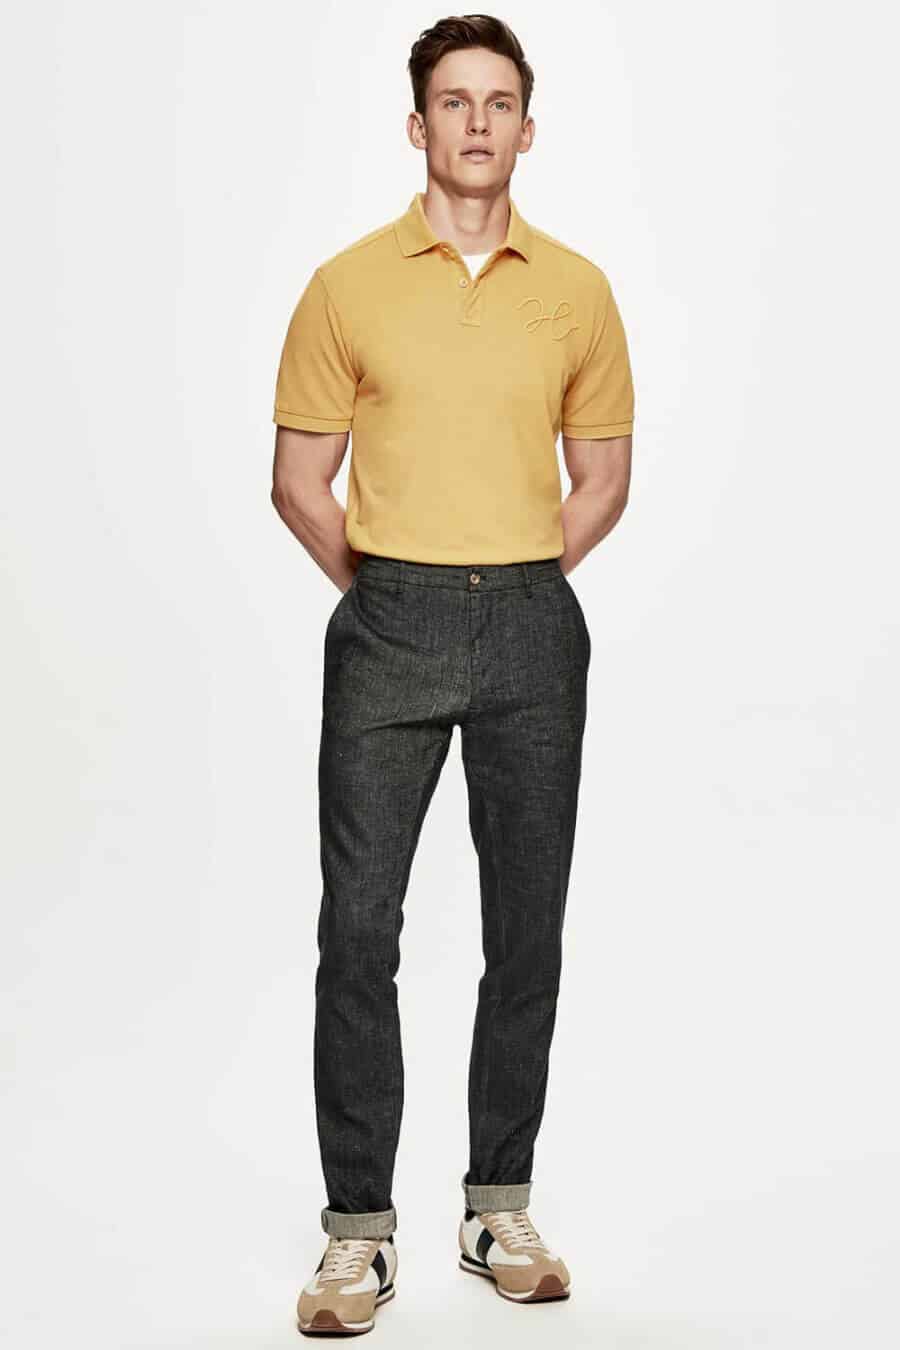 Men's bold yellow polo shirt with jeans and running shoes outfit